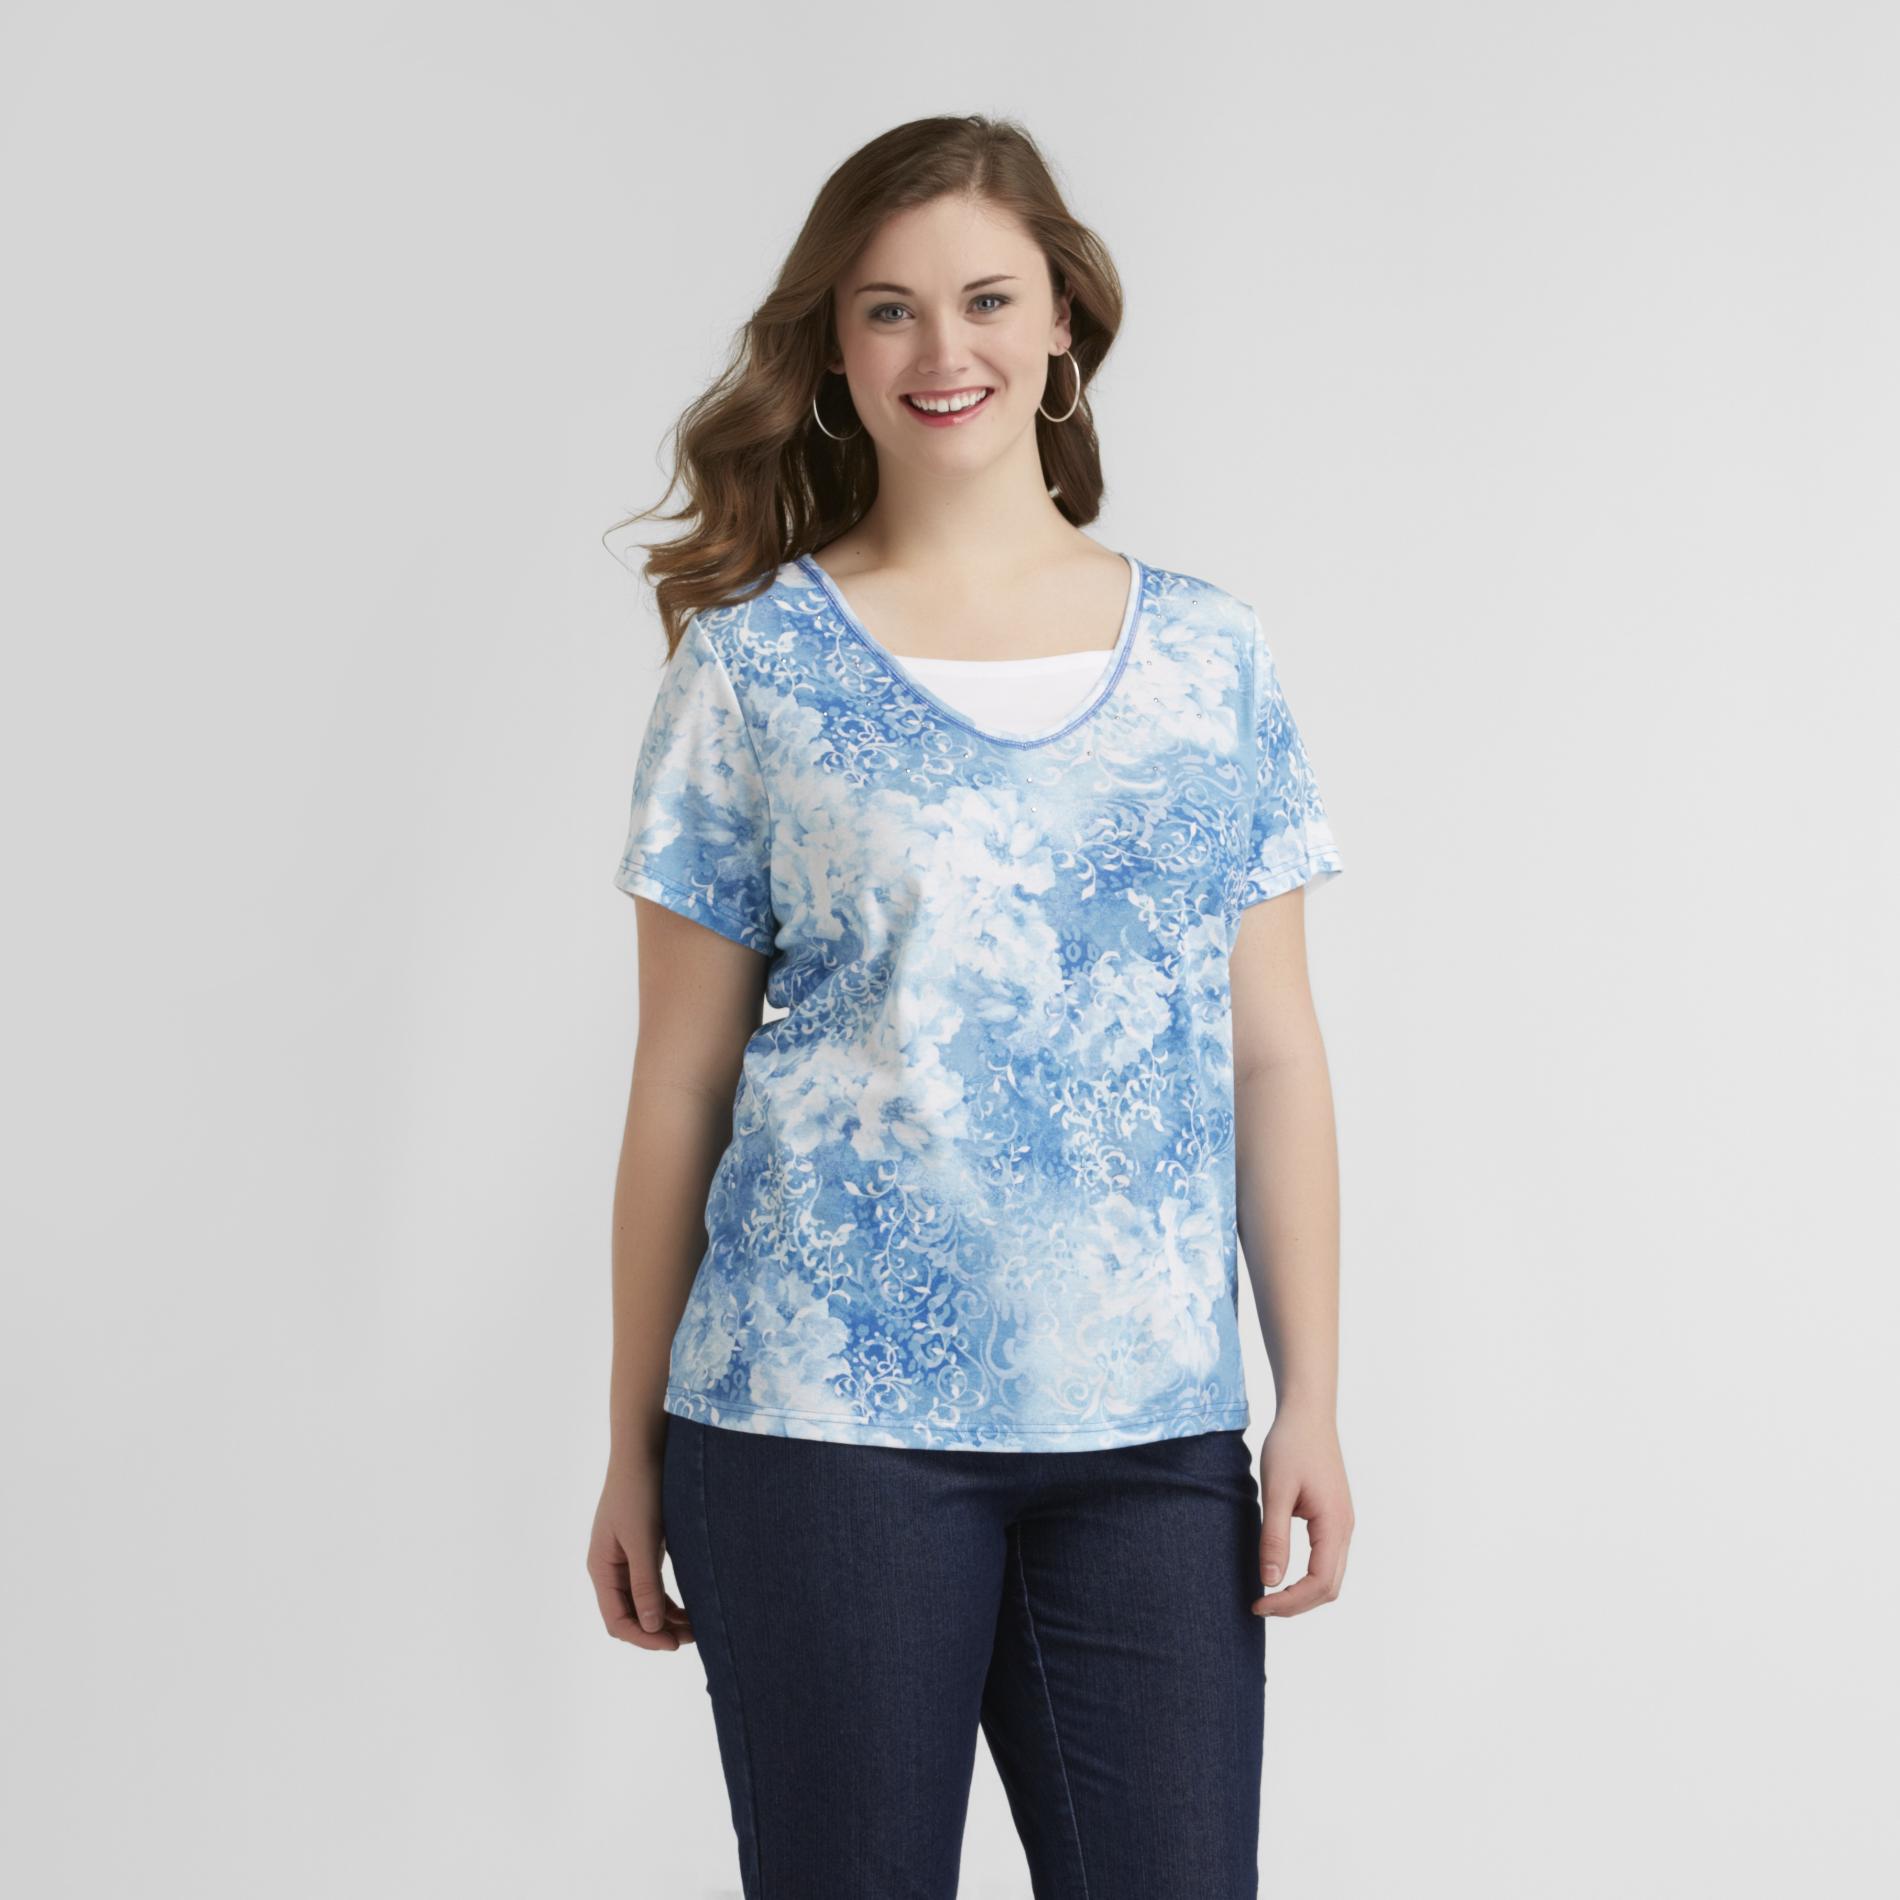 Basic Editions Women's Plus Layered Top - Floral Print